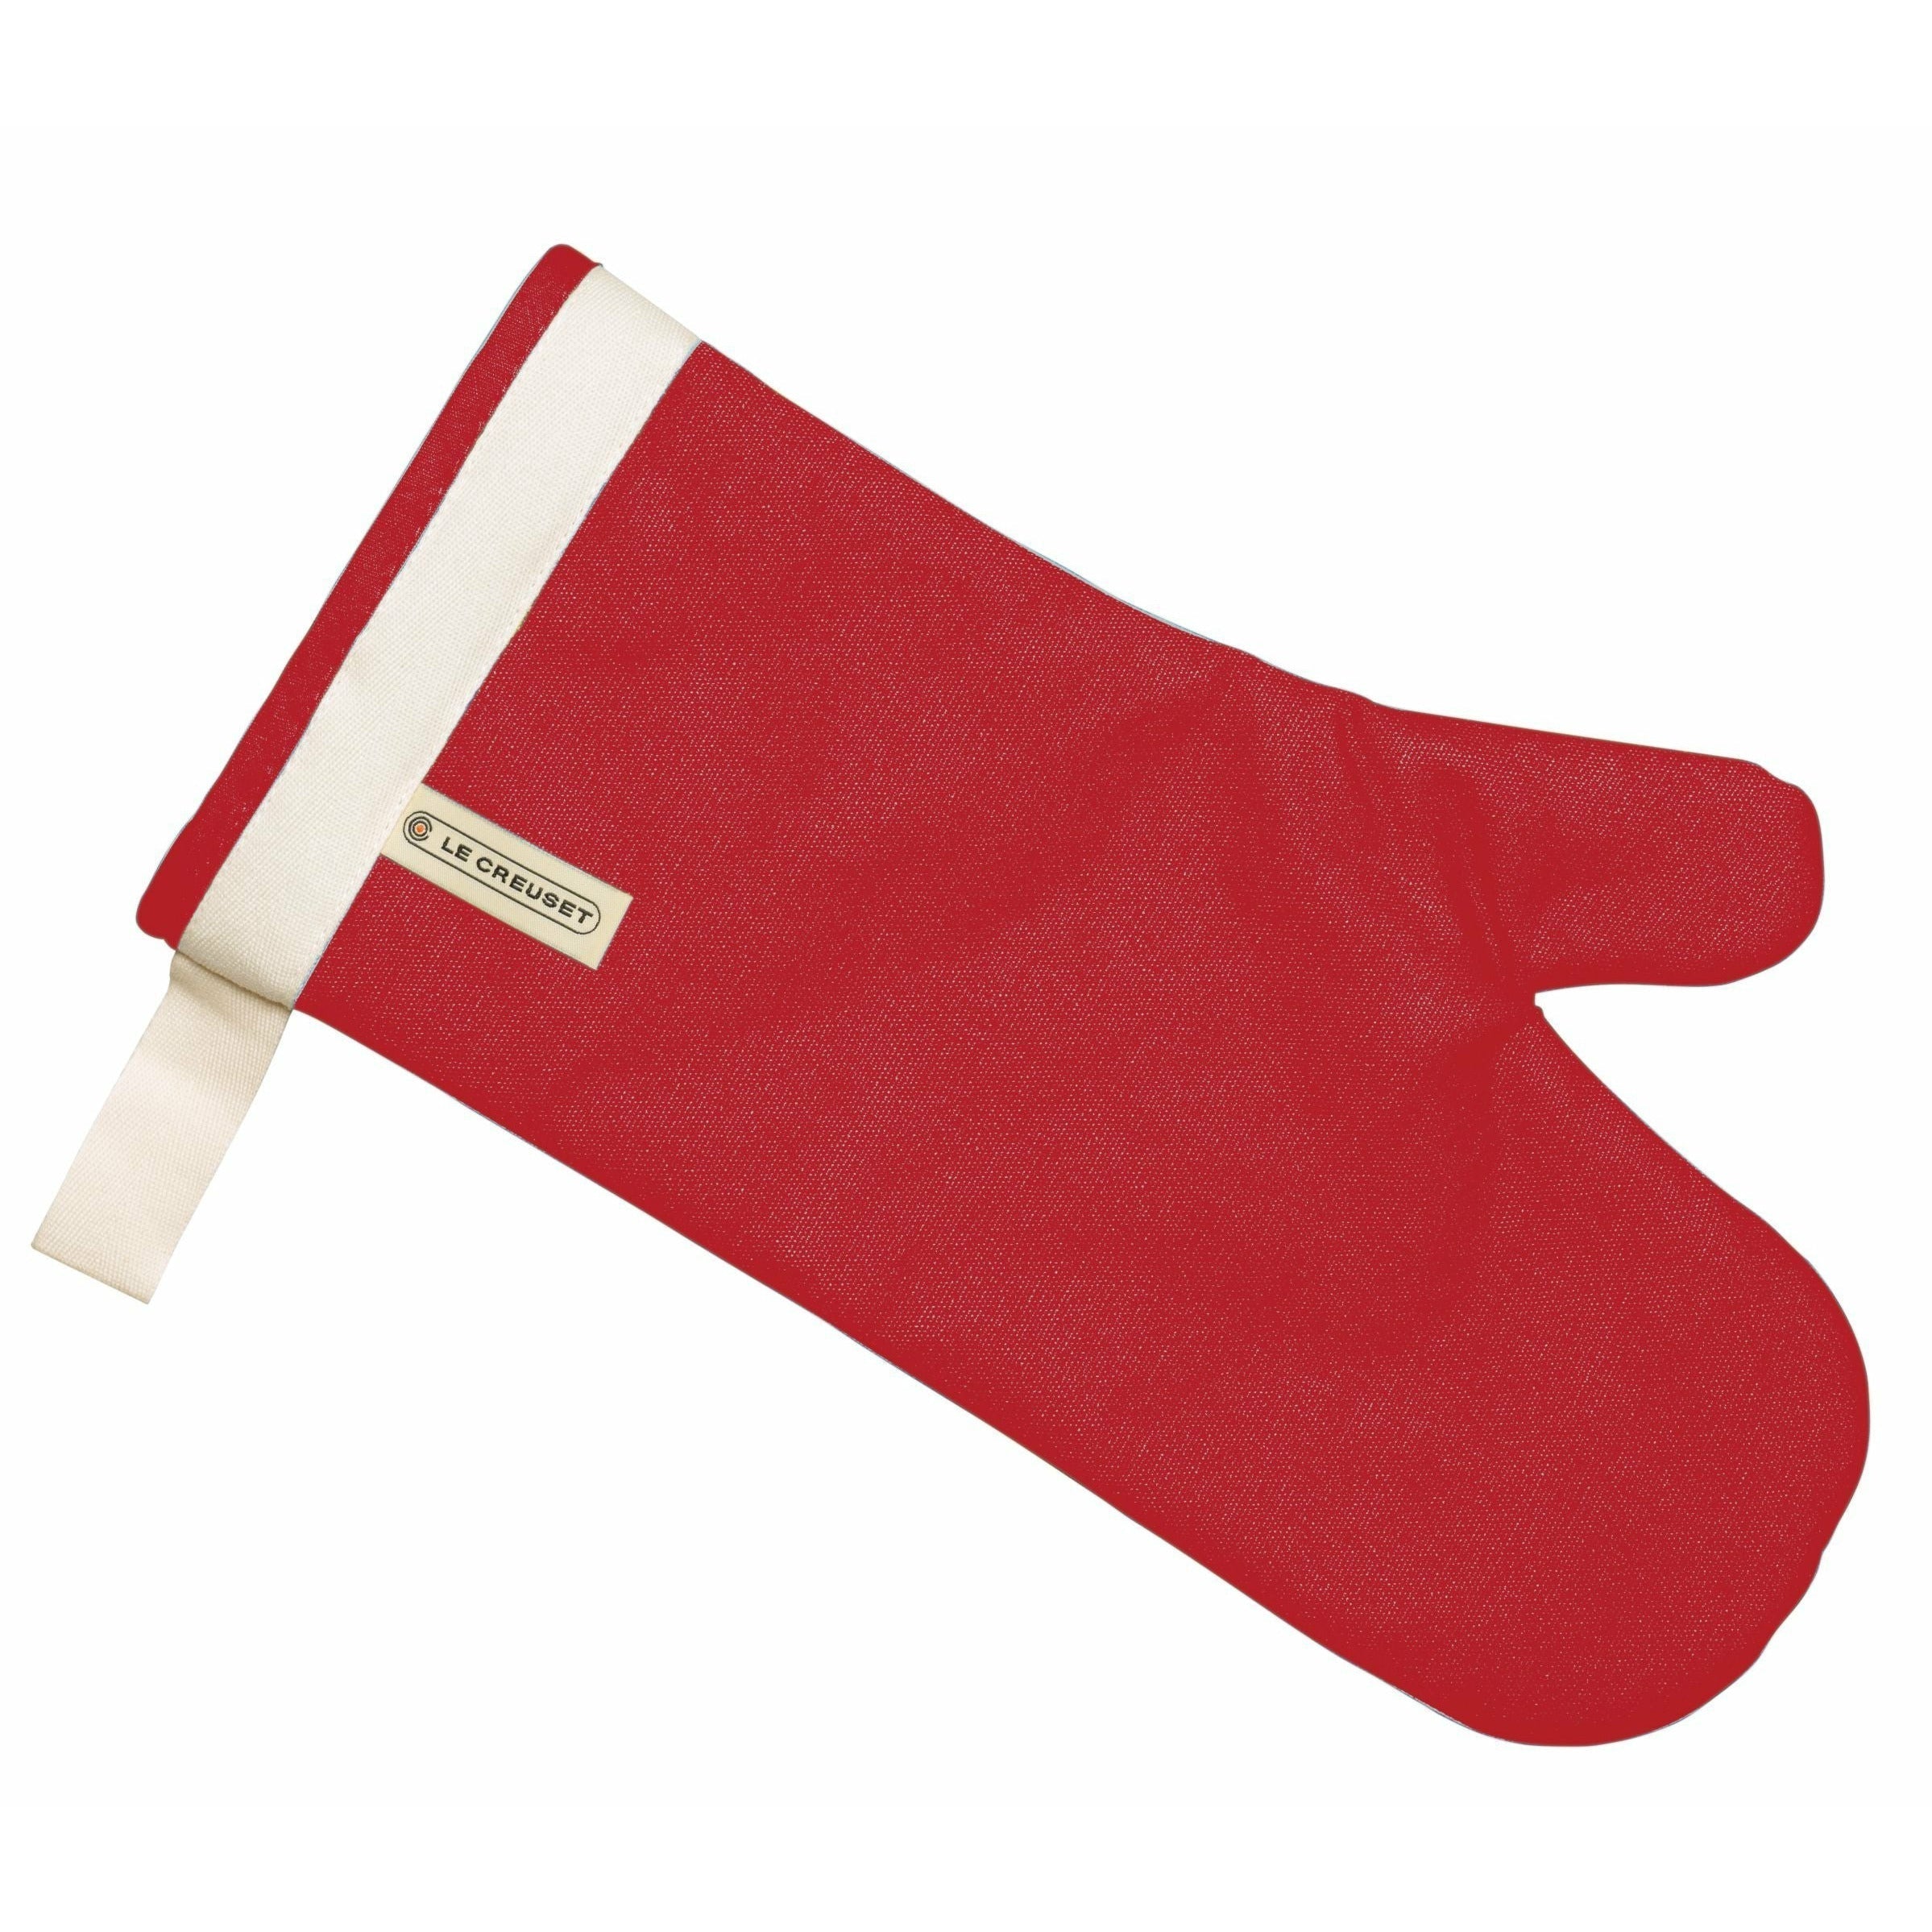 Le Creuset Oven Glove 35 X 18 Cm, Cherry Red